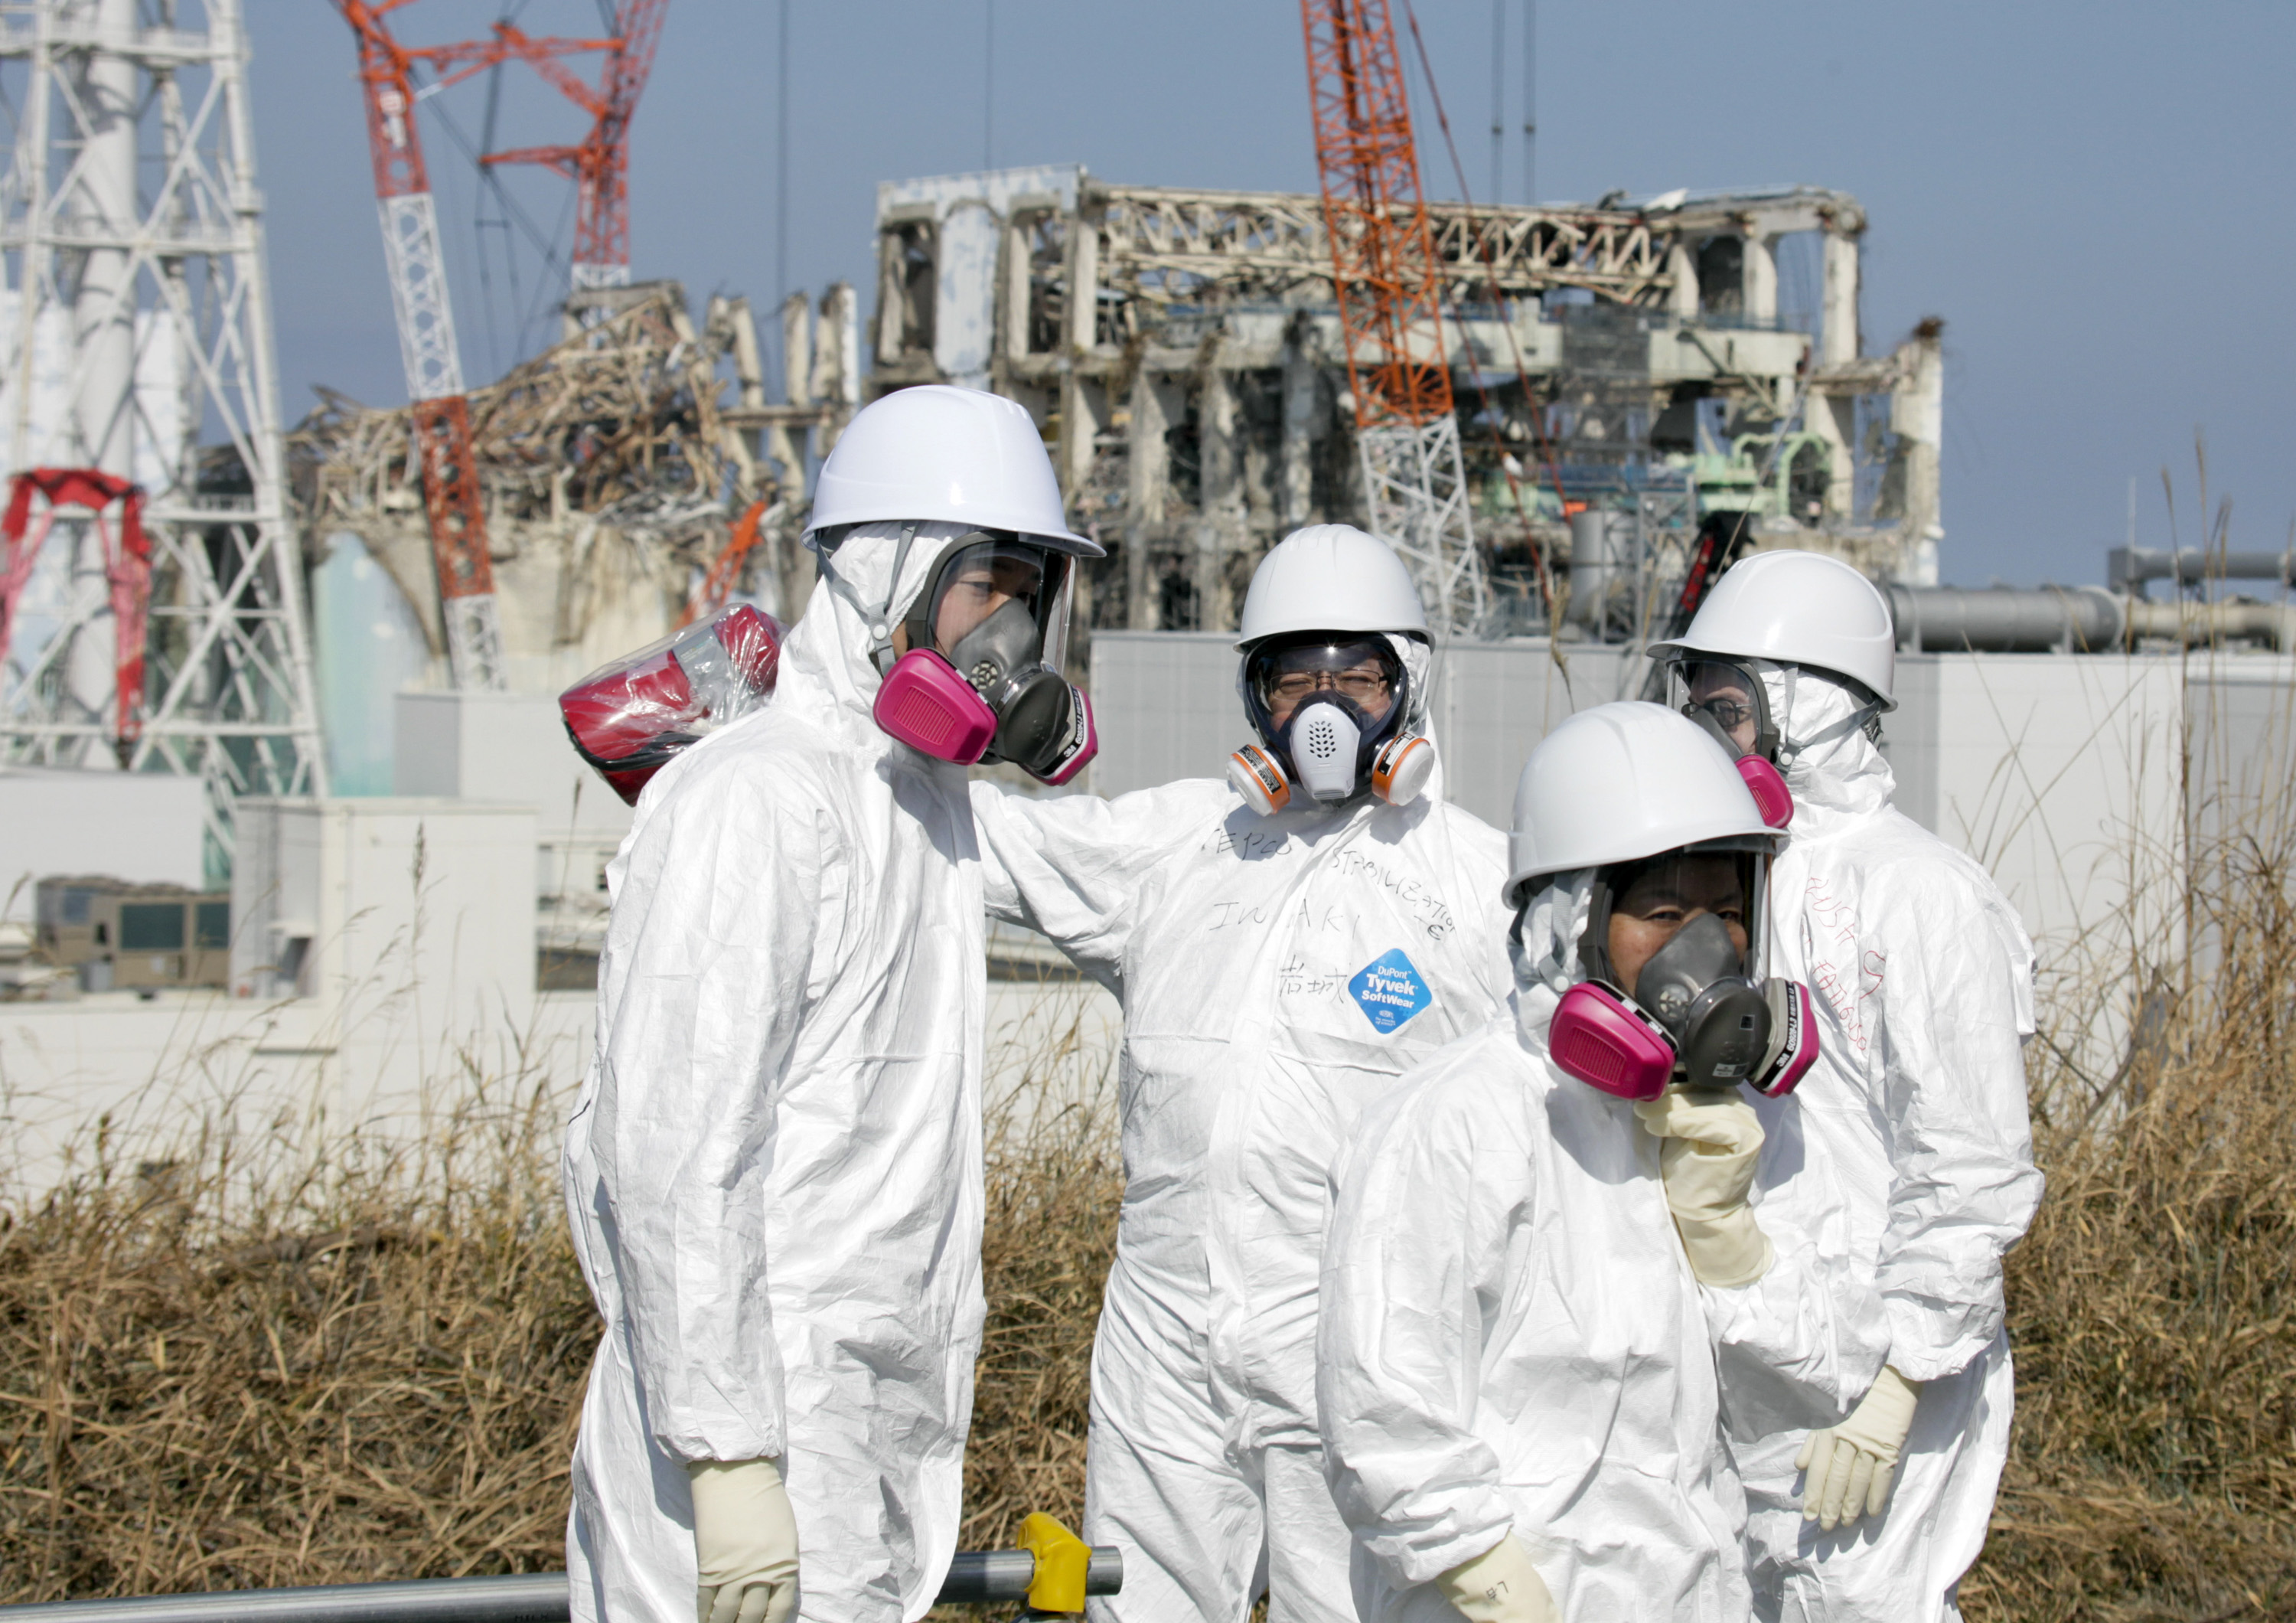 Member of the media, escorted by TEPCO employees, wearing protective suits and masks, look at the Unit 3 and Unit 4 reactor buildings of Tokyo Electric Power Co. (TEPCO)'s tsunami-crippled Fukushima Daiichi nuclear power station in Okuma, Fukushima prefecture, northeastern Japan, Tuesday, Feb. 28, 2012. (AP Photo/Kimimasa Mayama, Pool)